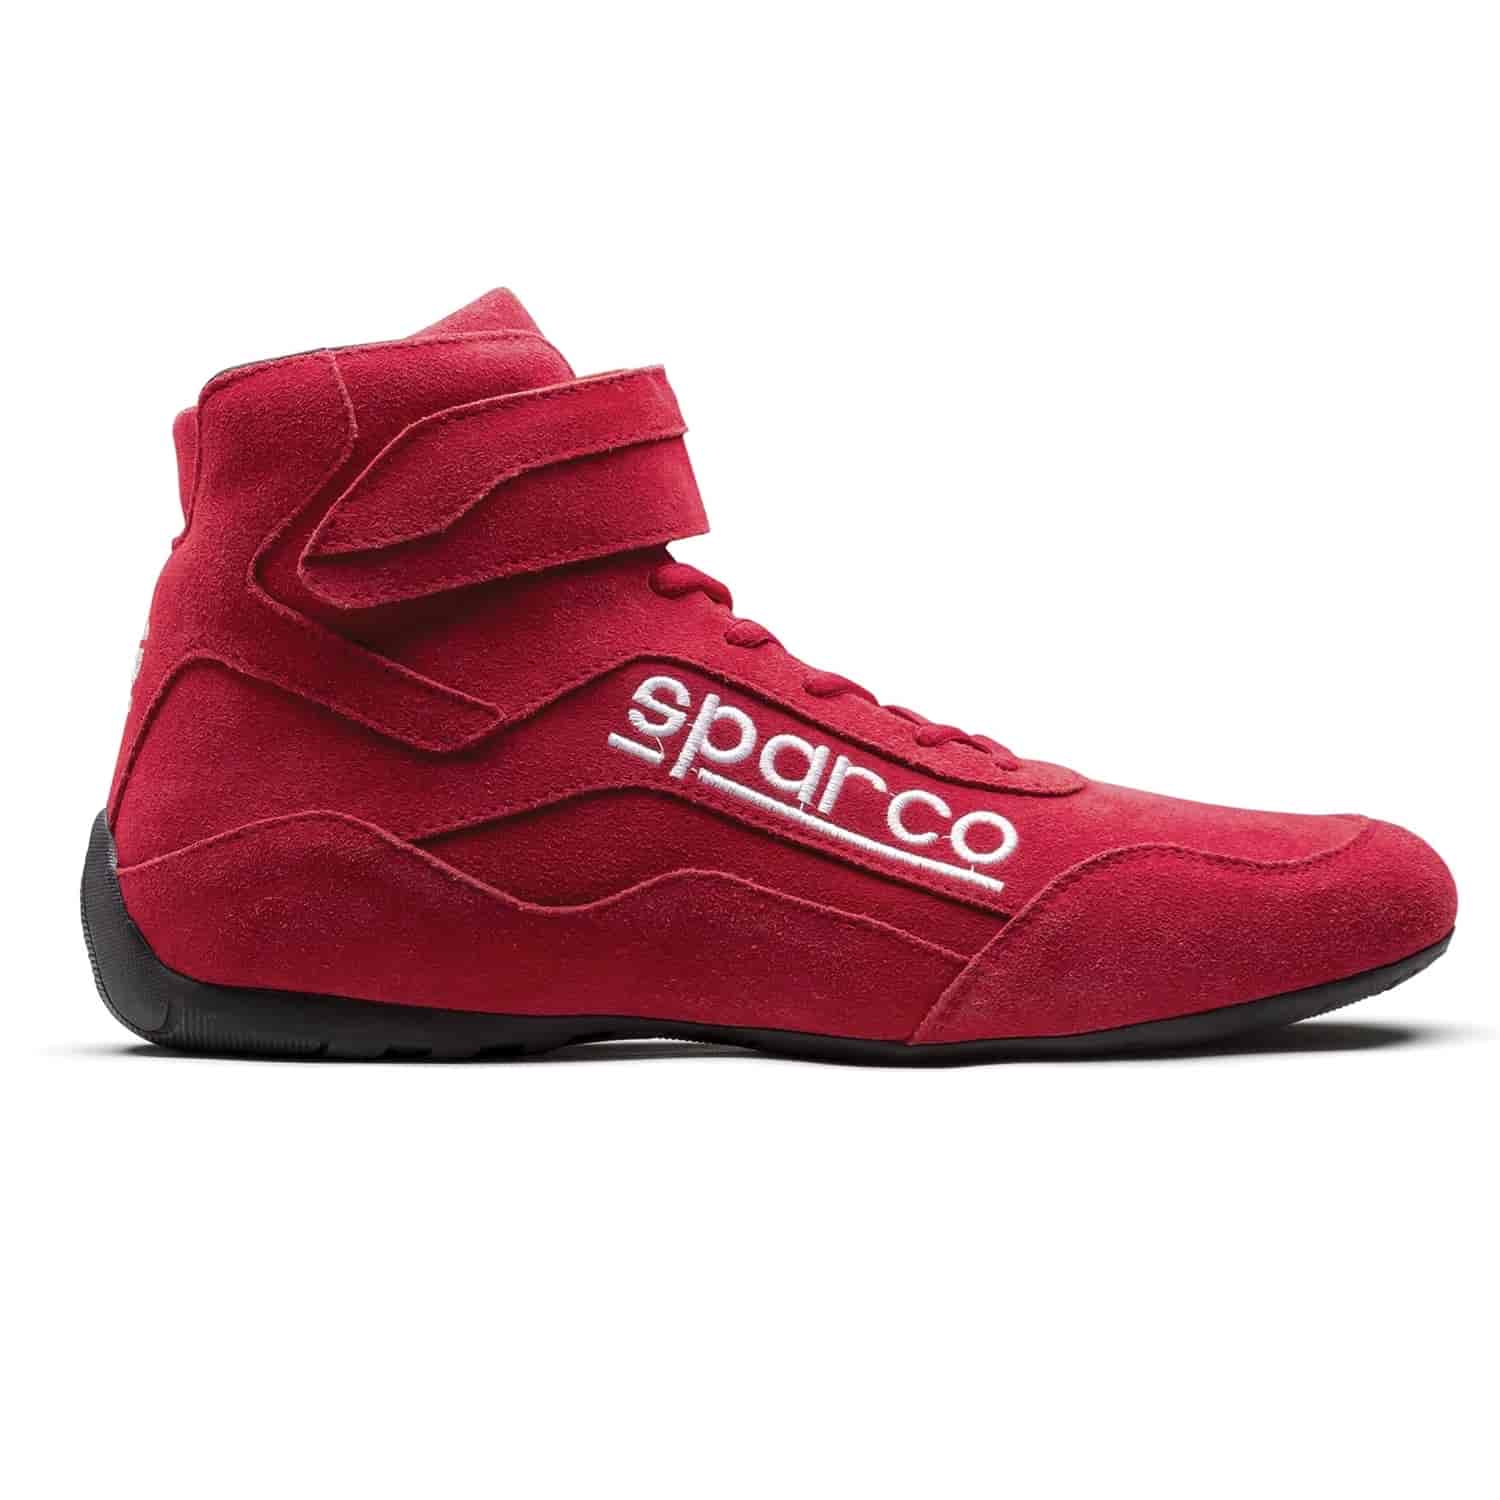 Race 2 Shoe Size 11 - Red